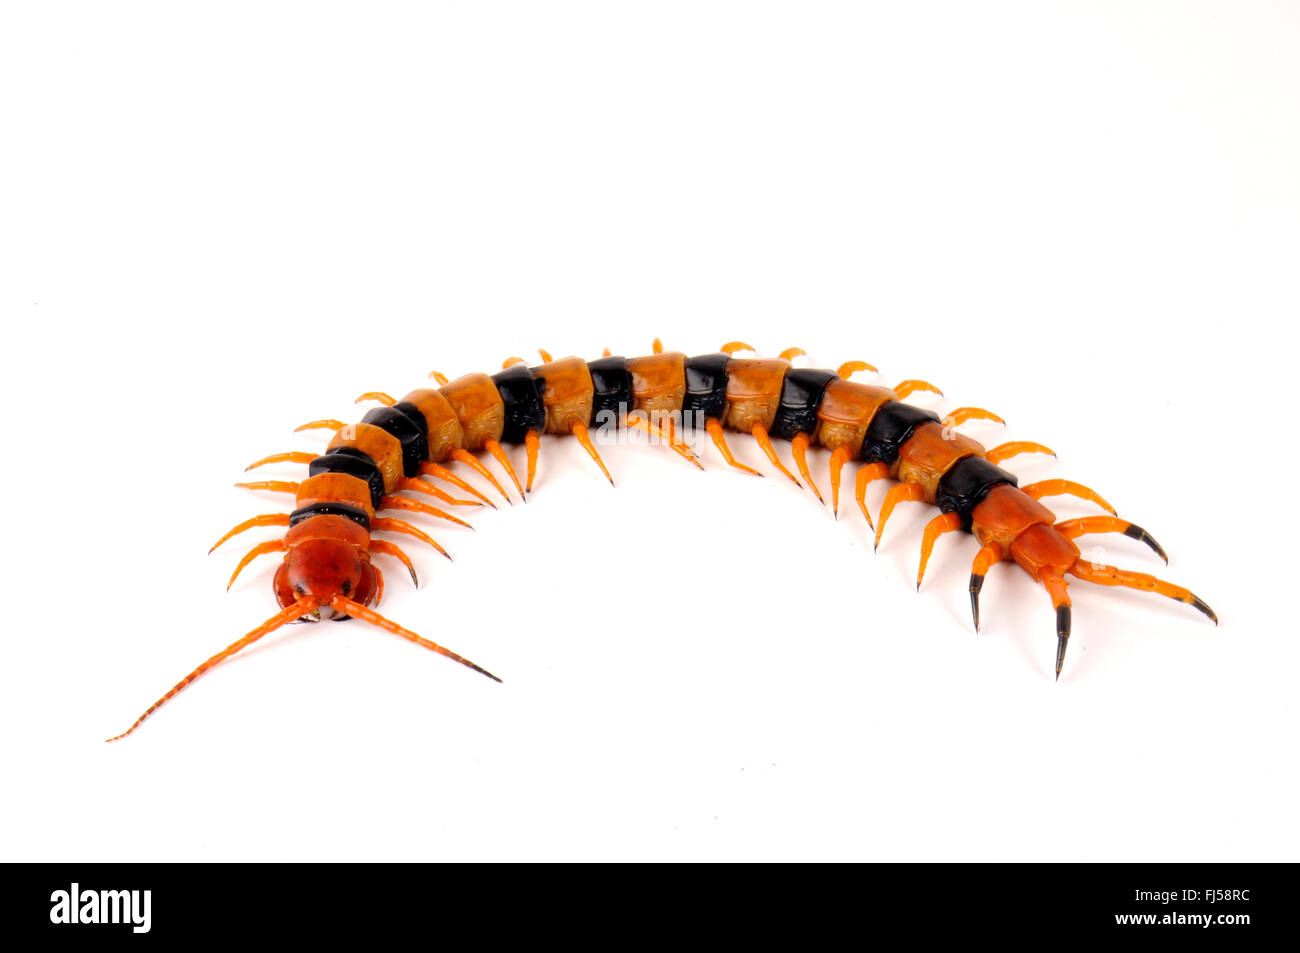 Indian Giant Tiger Centipede, Indian Tiger Centipede (Scolopendra hardwickei), striped Indian Giant Tiger Centipede Stock Photo